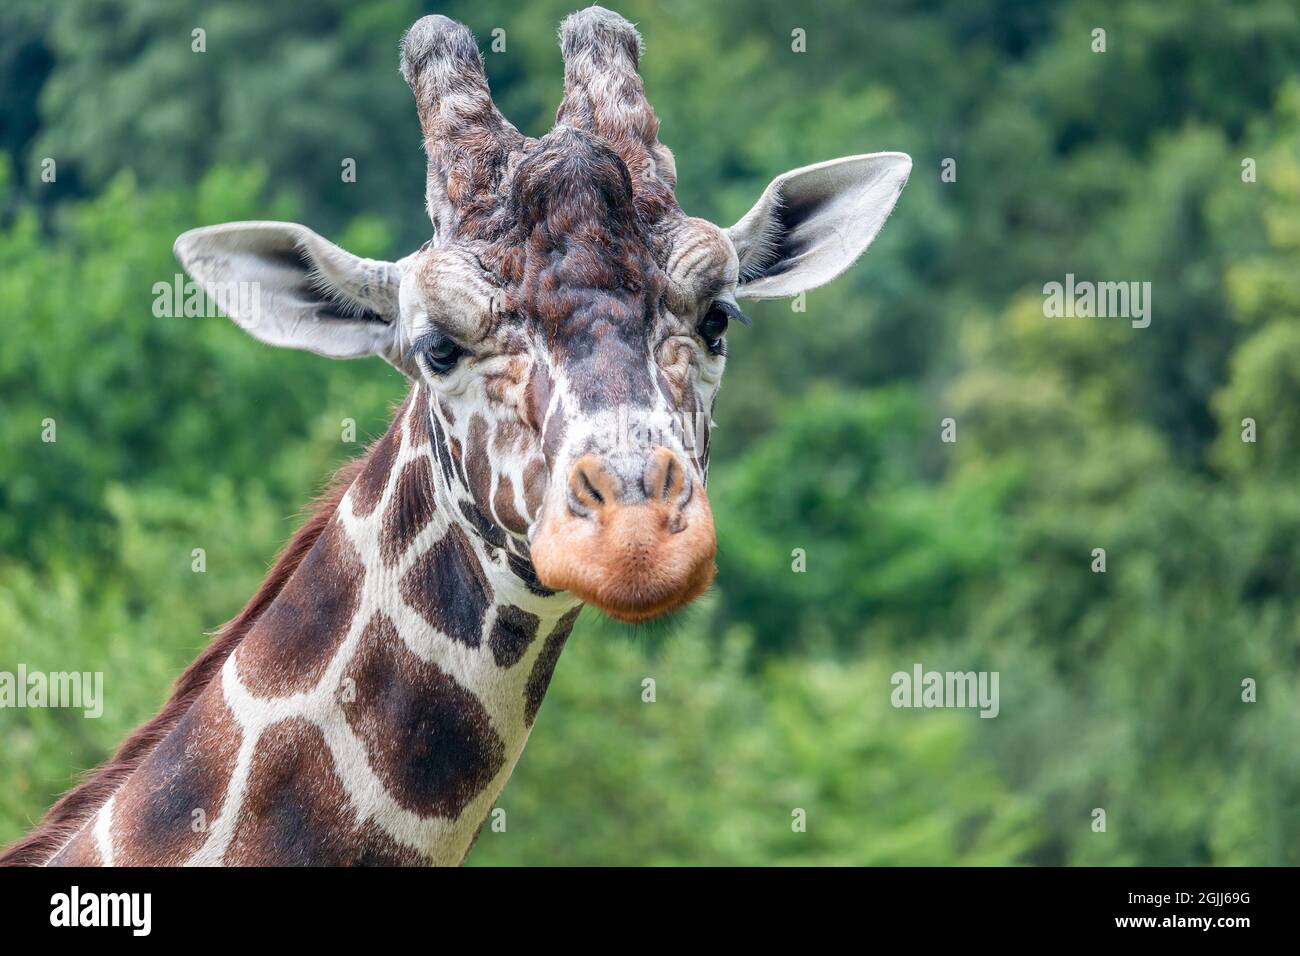 portrait of a giraffe - giraffe head, front view, green trees in the background Stock Photo